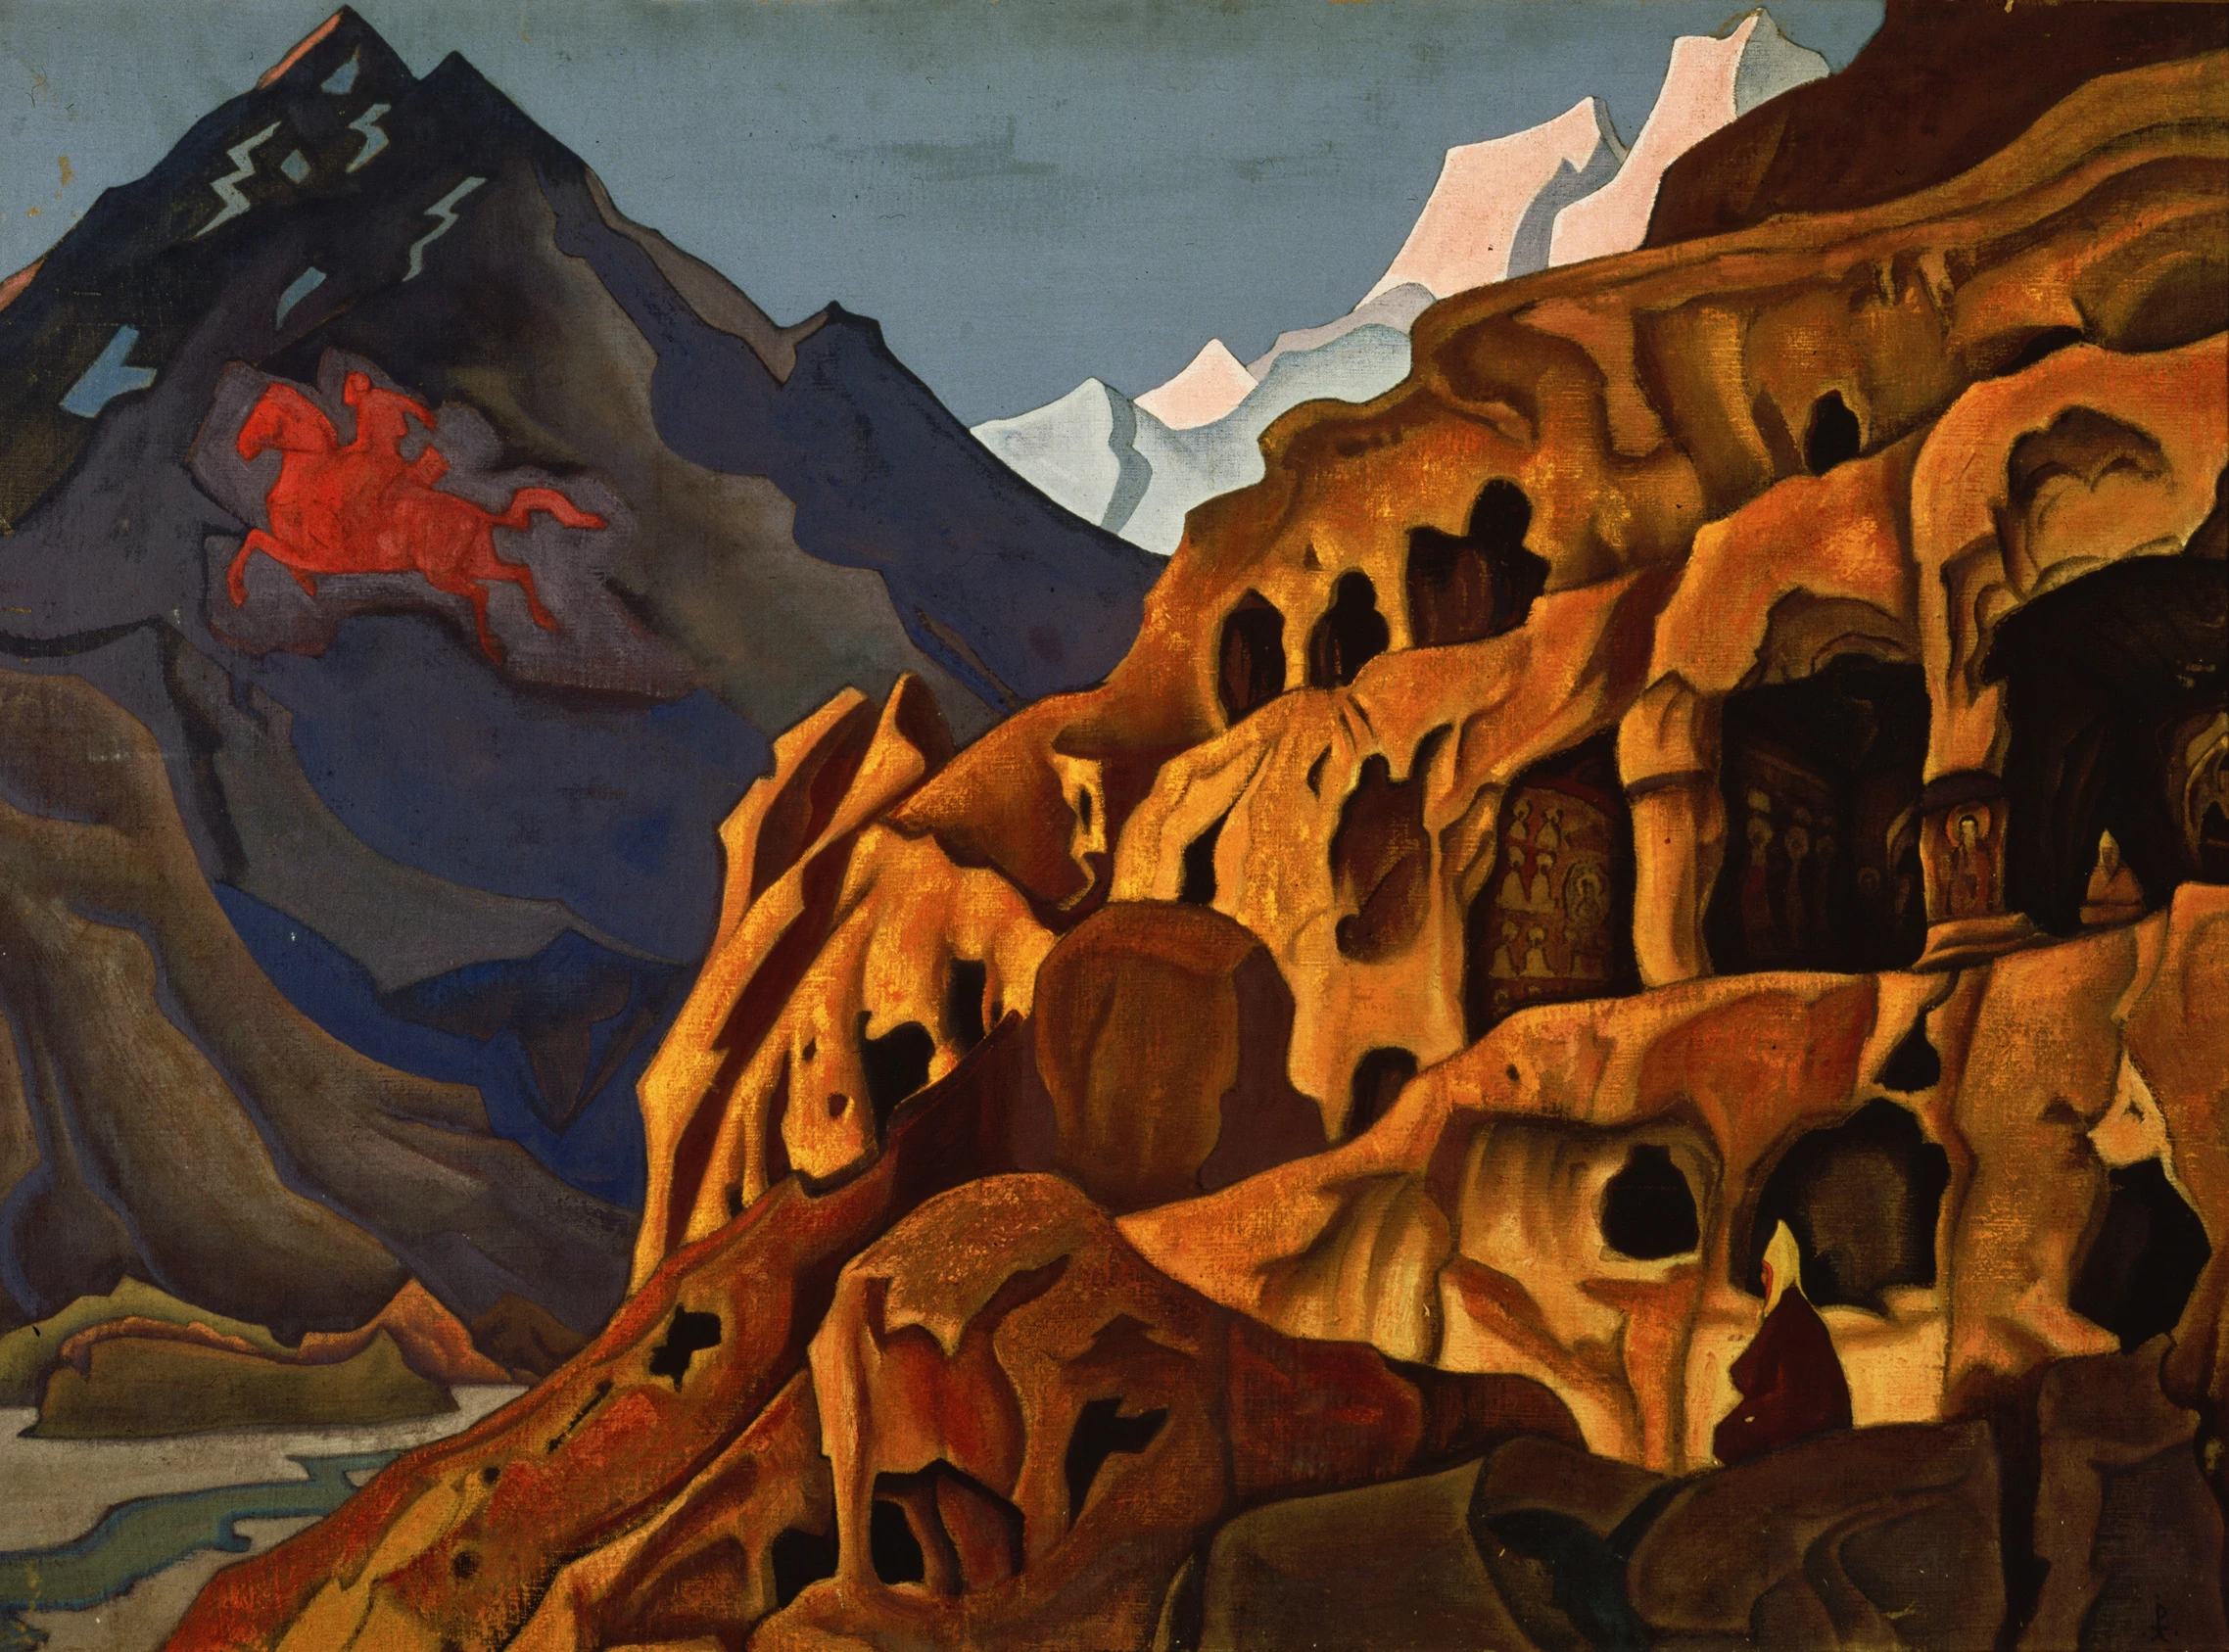 Power of the Caves, Nicholas Roerich